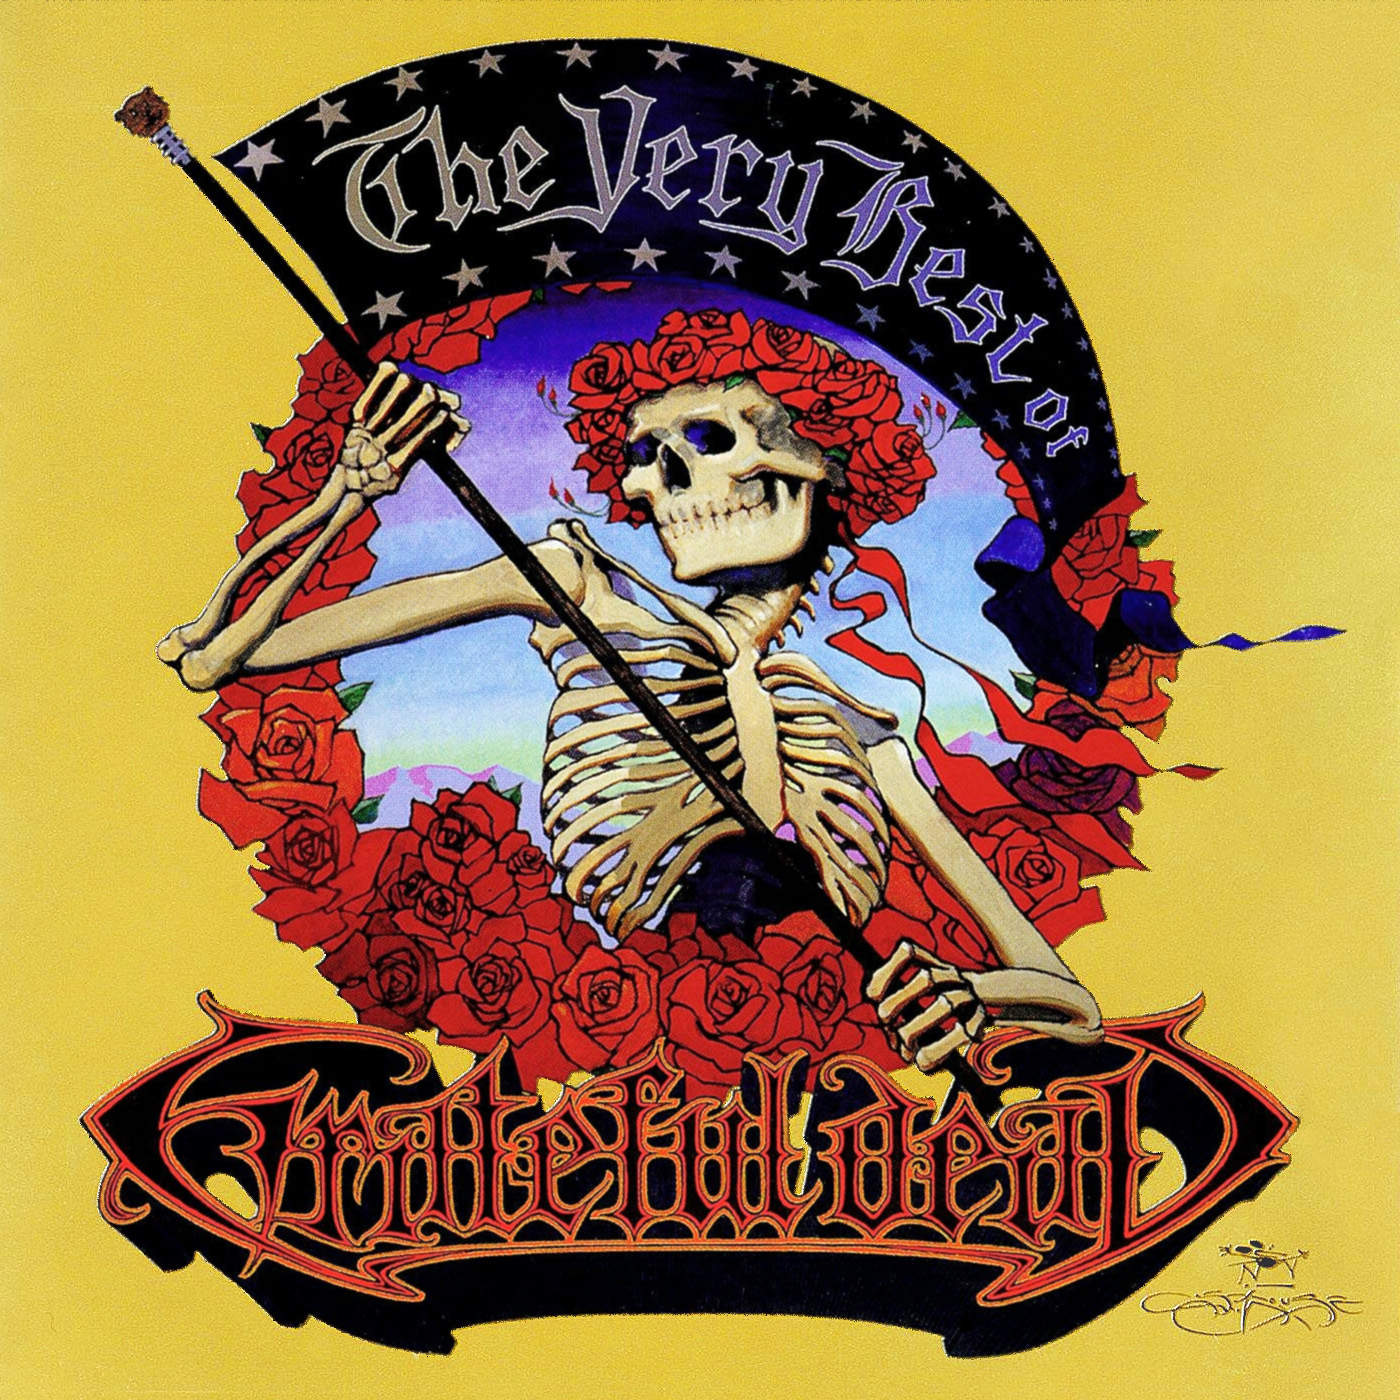 Art for Uncle John's Band by Grateful Dead